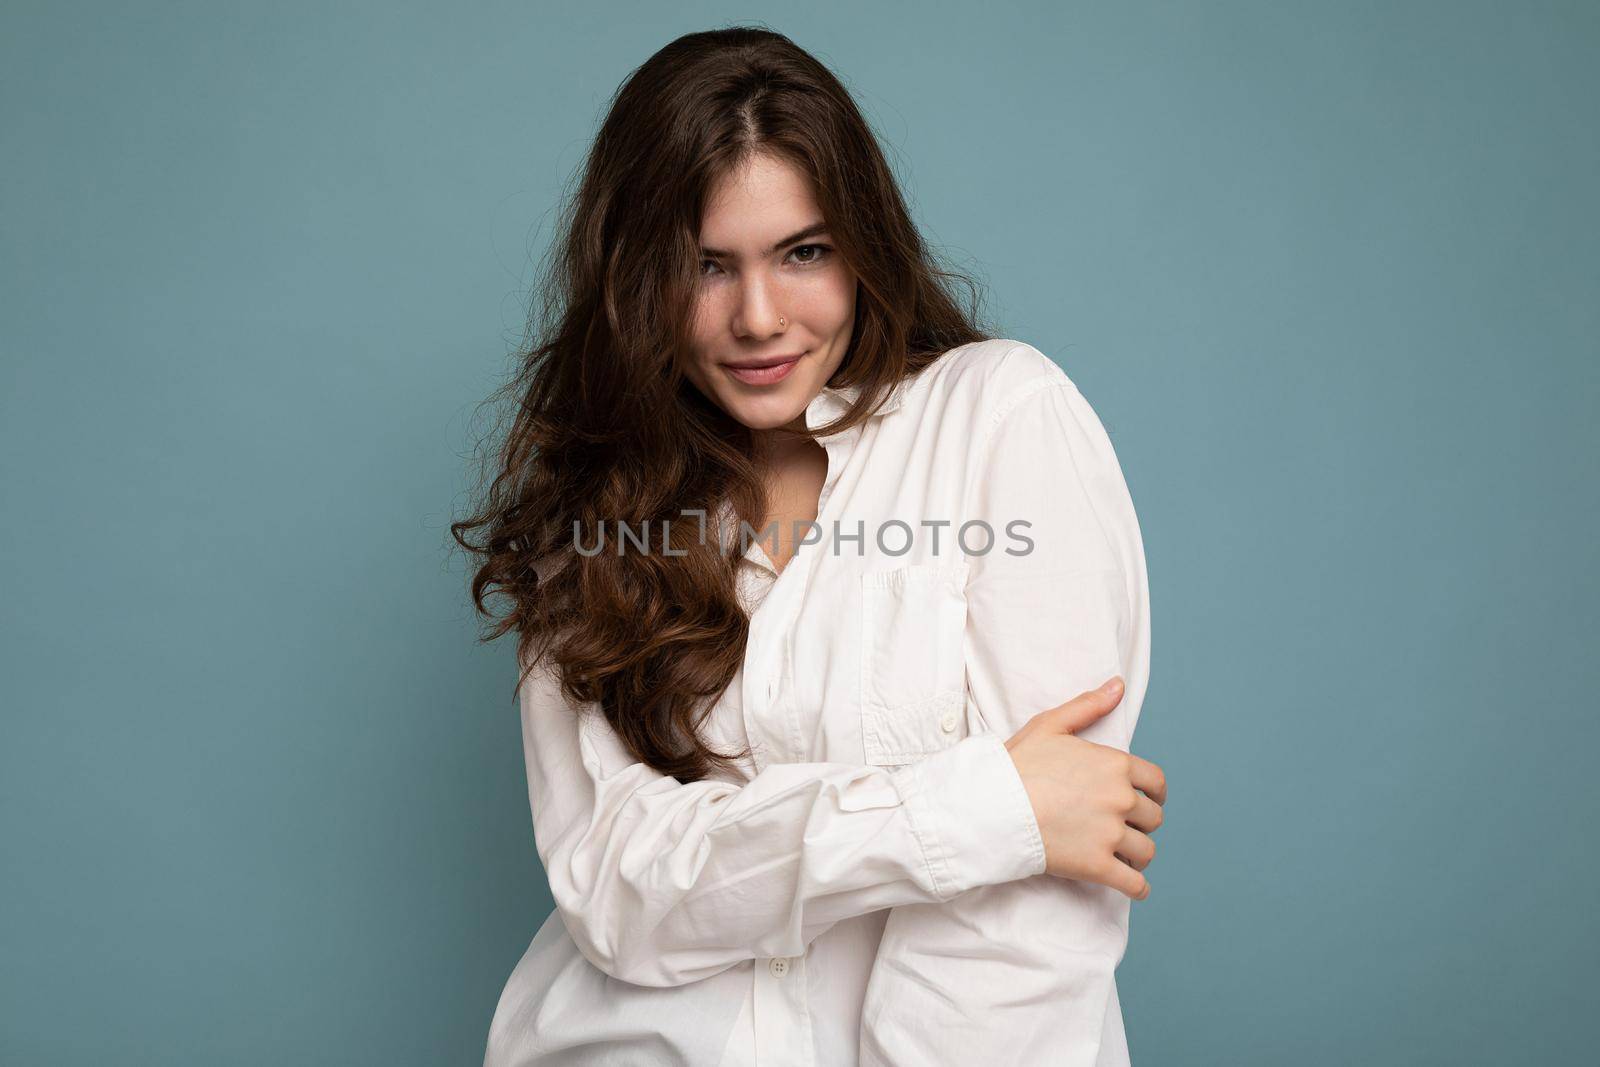 Portrait of young cute tender attractive winsome charming curly brunette woman with sincere emotions wearing stylish white shirt isolated on blue background with copy space.